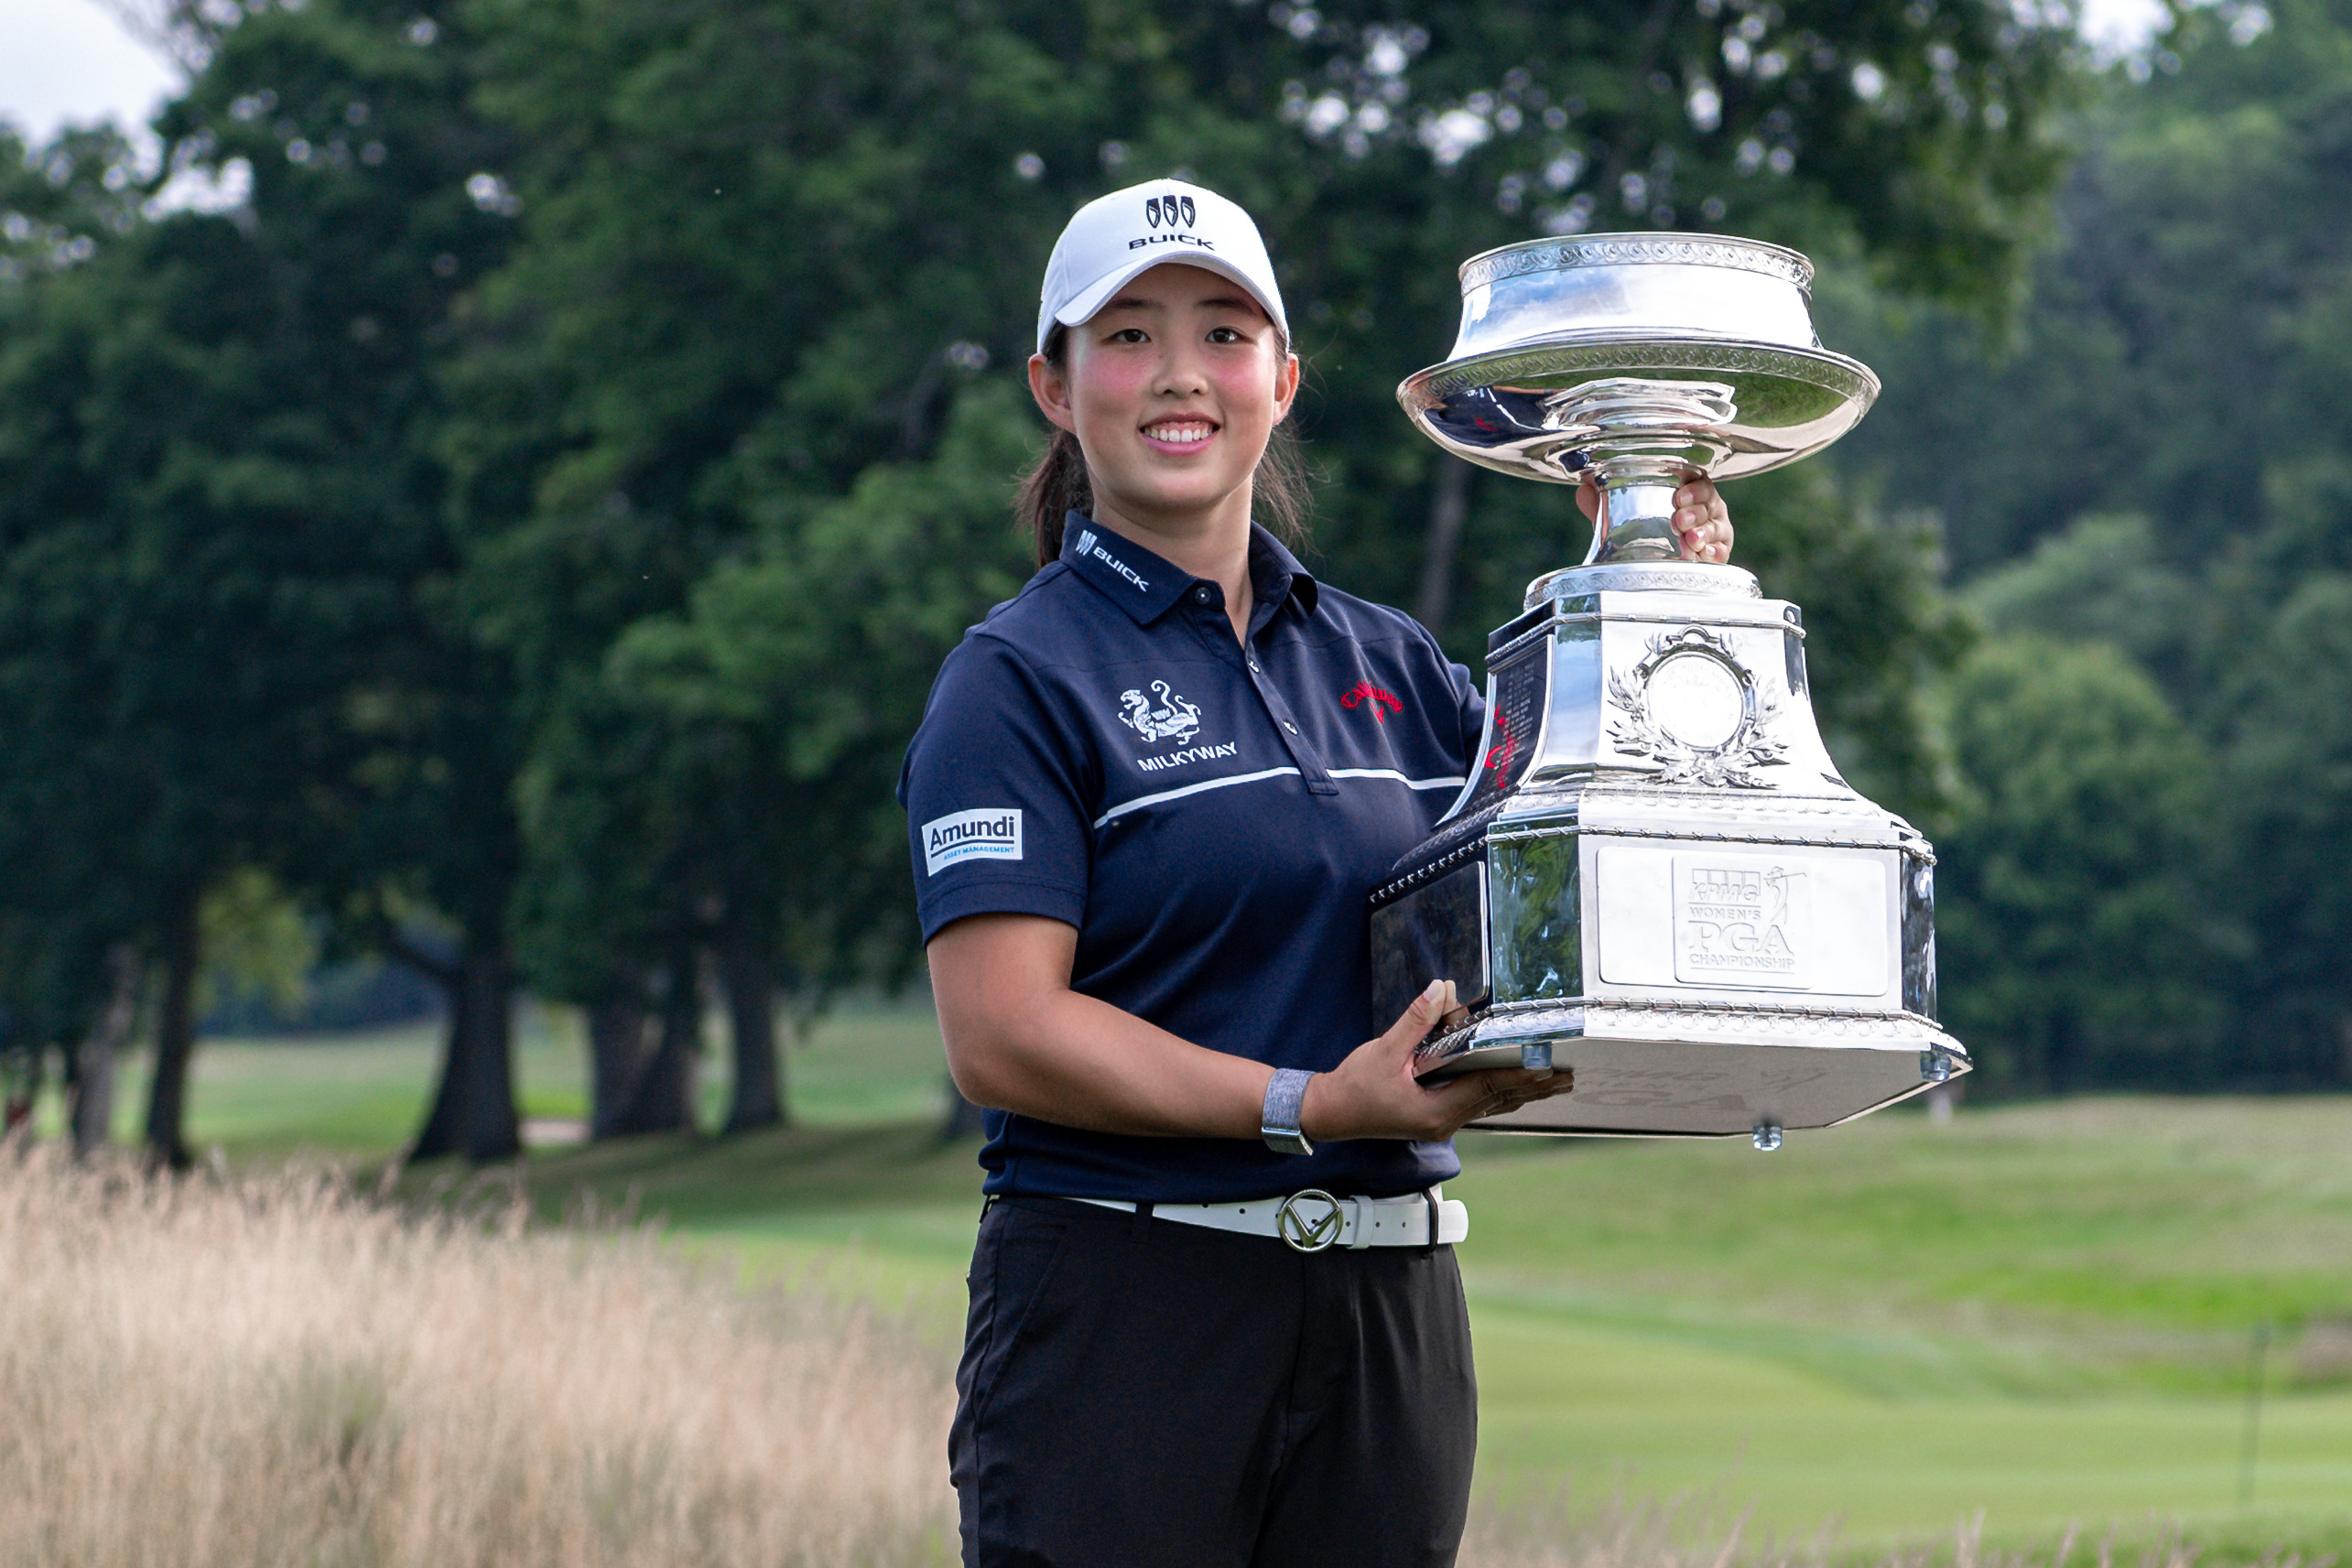 Chinas Yin Ruoning collects maiden major title at Womens PGA Championship Reuters